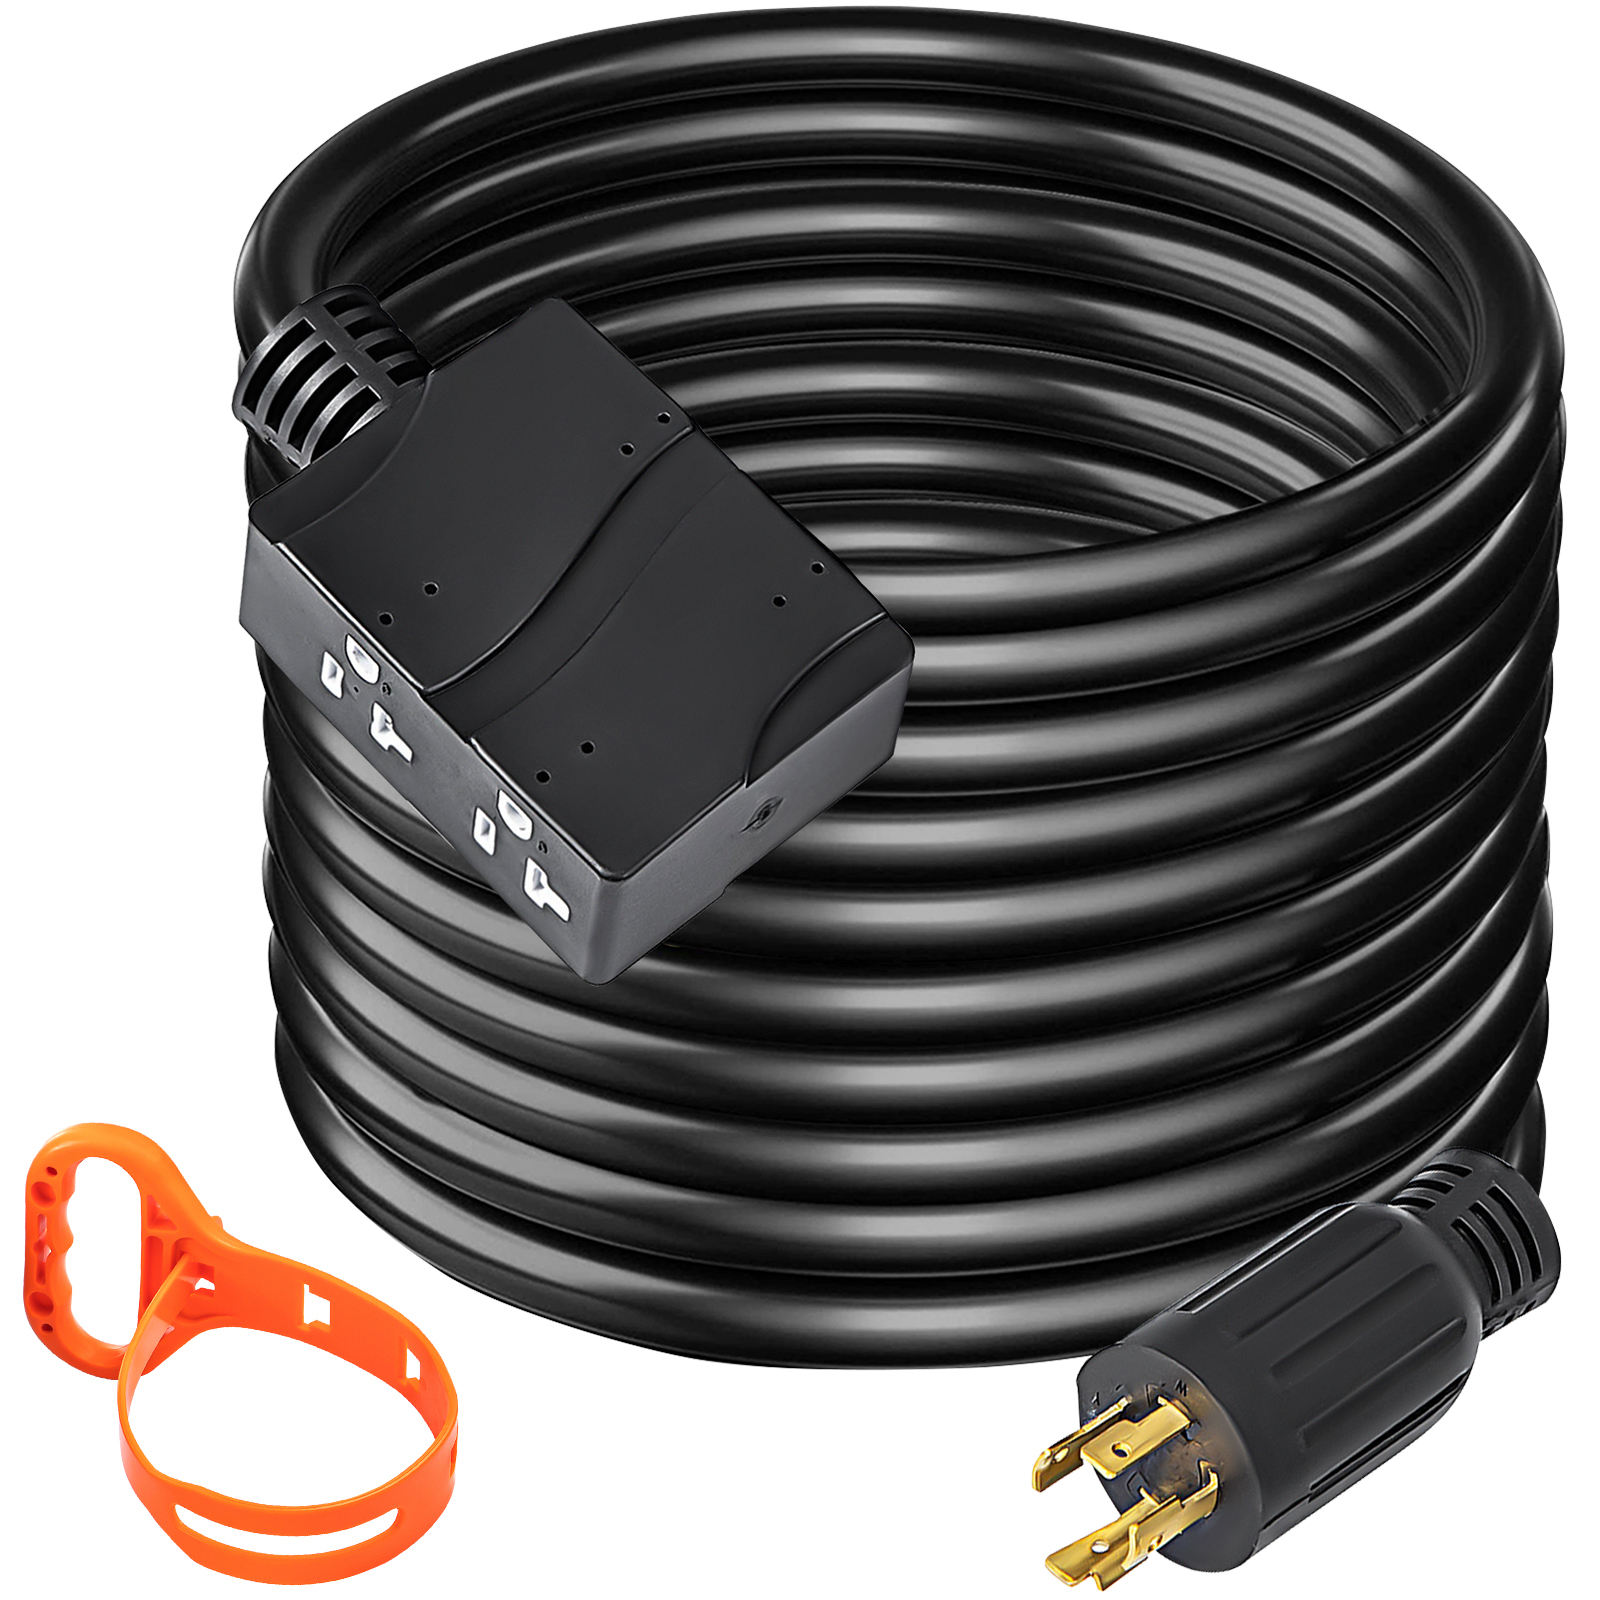 Generator Power Cord Extension Cord 50FT 20A L14-20P to 4*N5-20R Generator Cable 